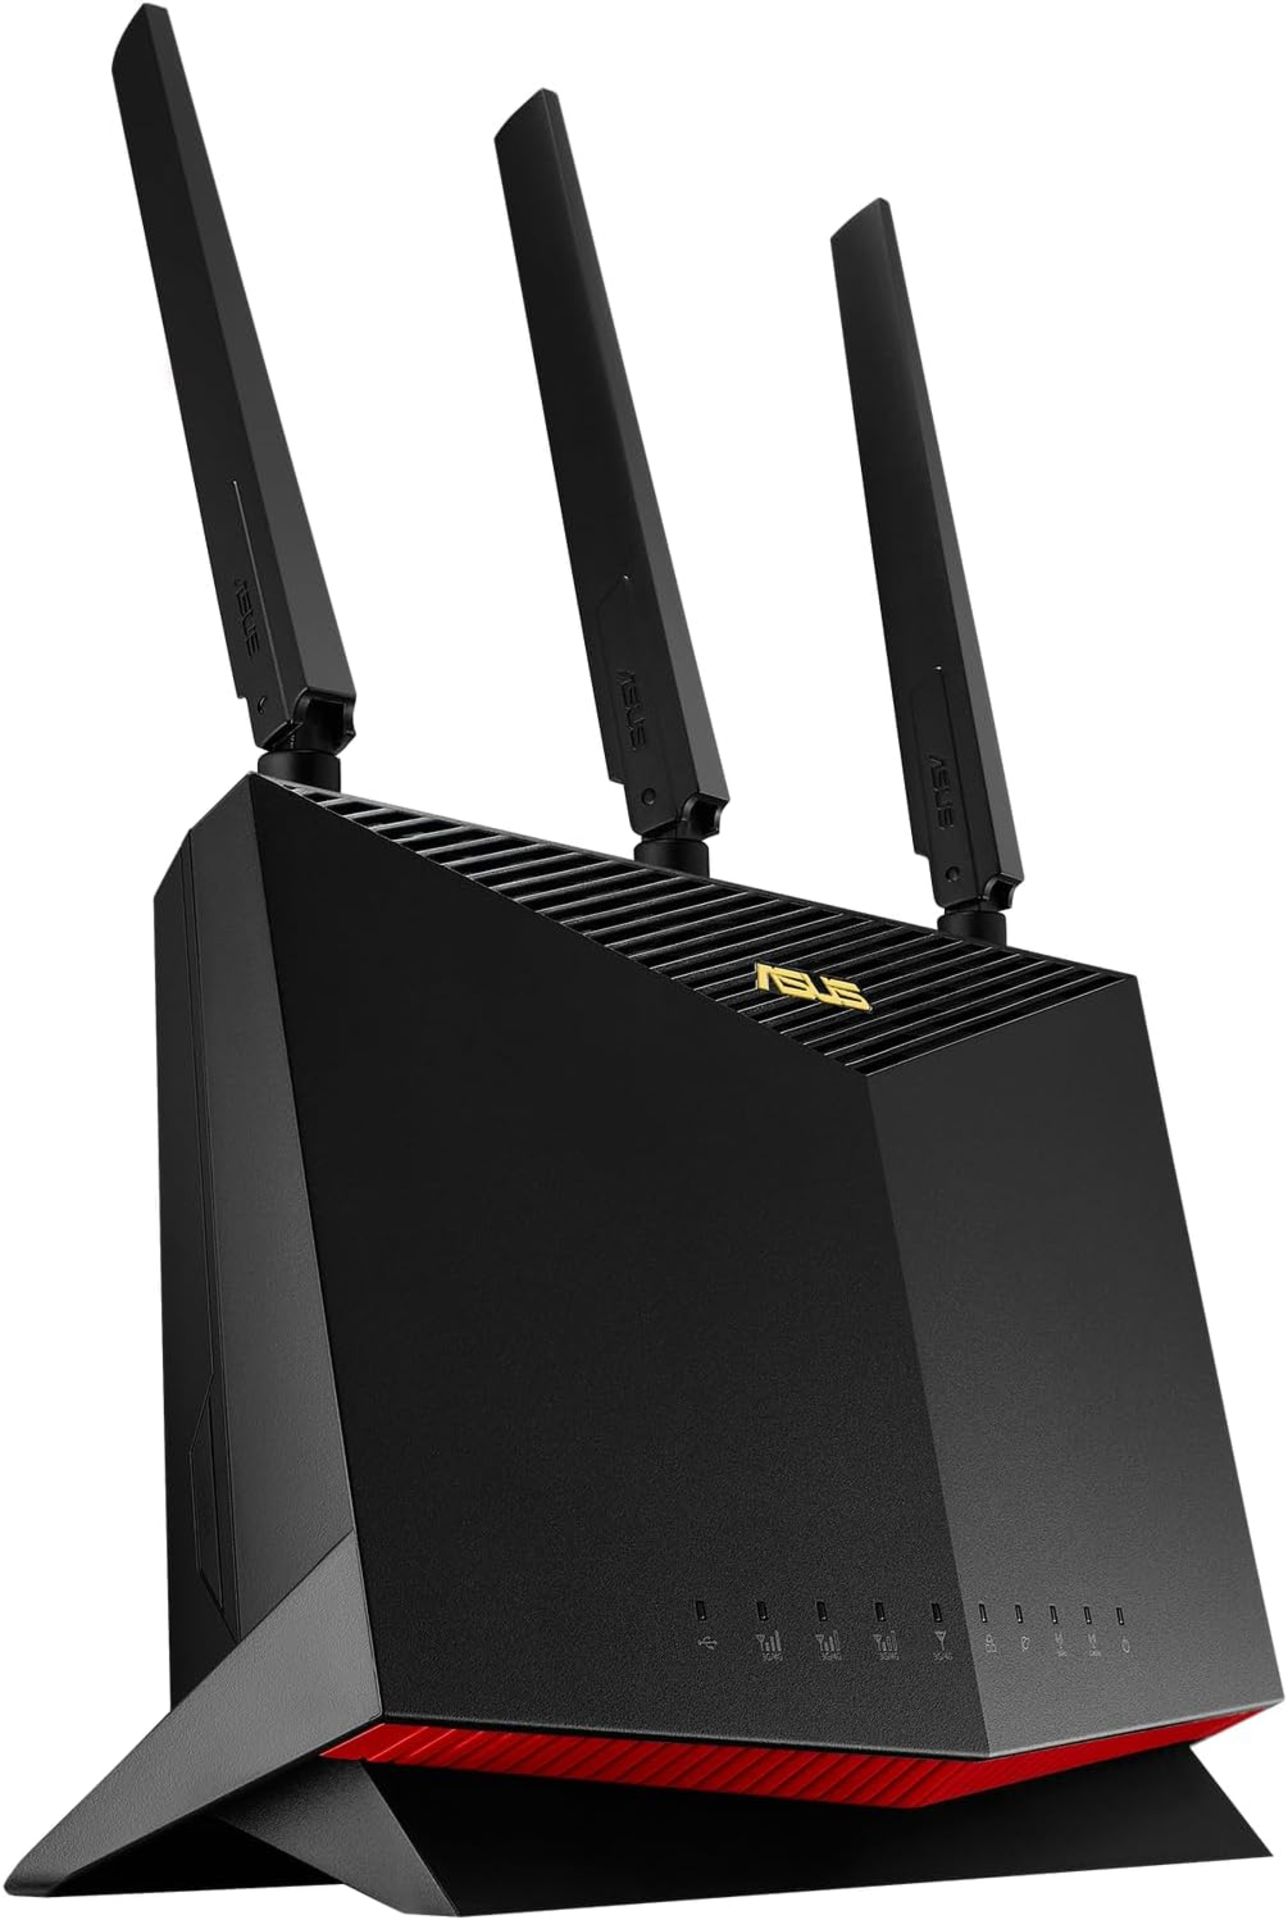 BRAND NEW FACTORY SEALED ASUS 4G-AC86U Cat. 12 600Mbps Dual-Band AC2600 LTE Modem Router. RRP £314. - Image 3 of 4